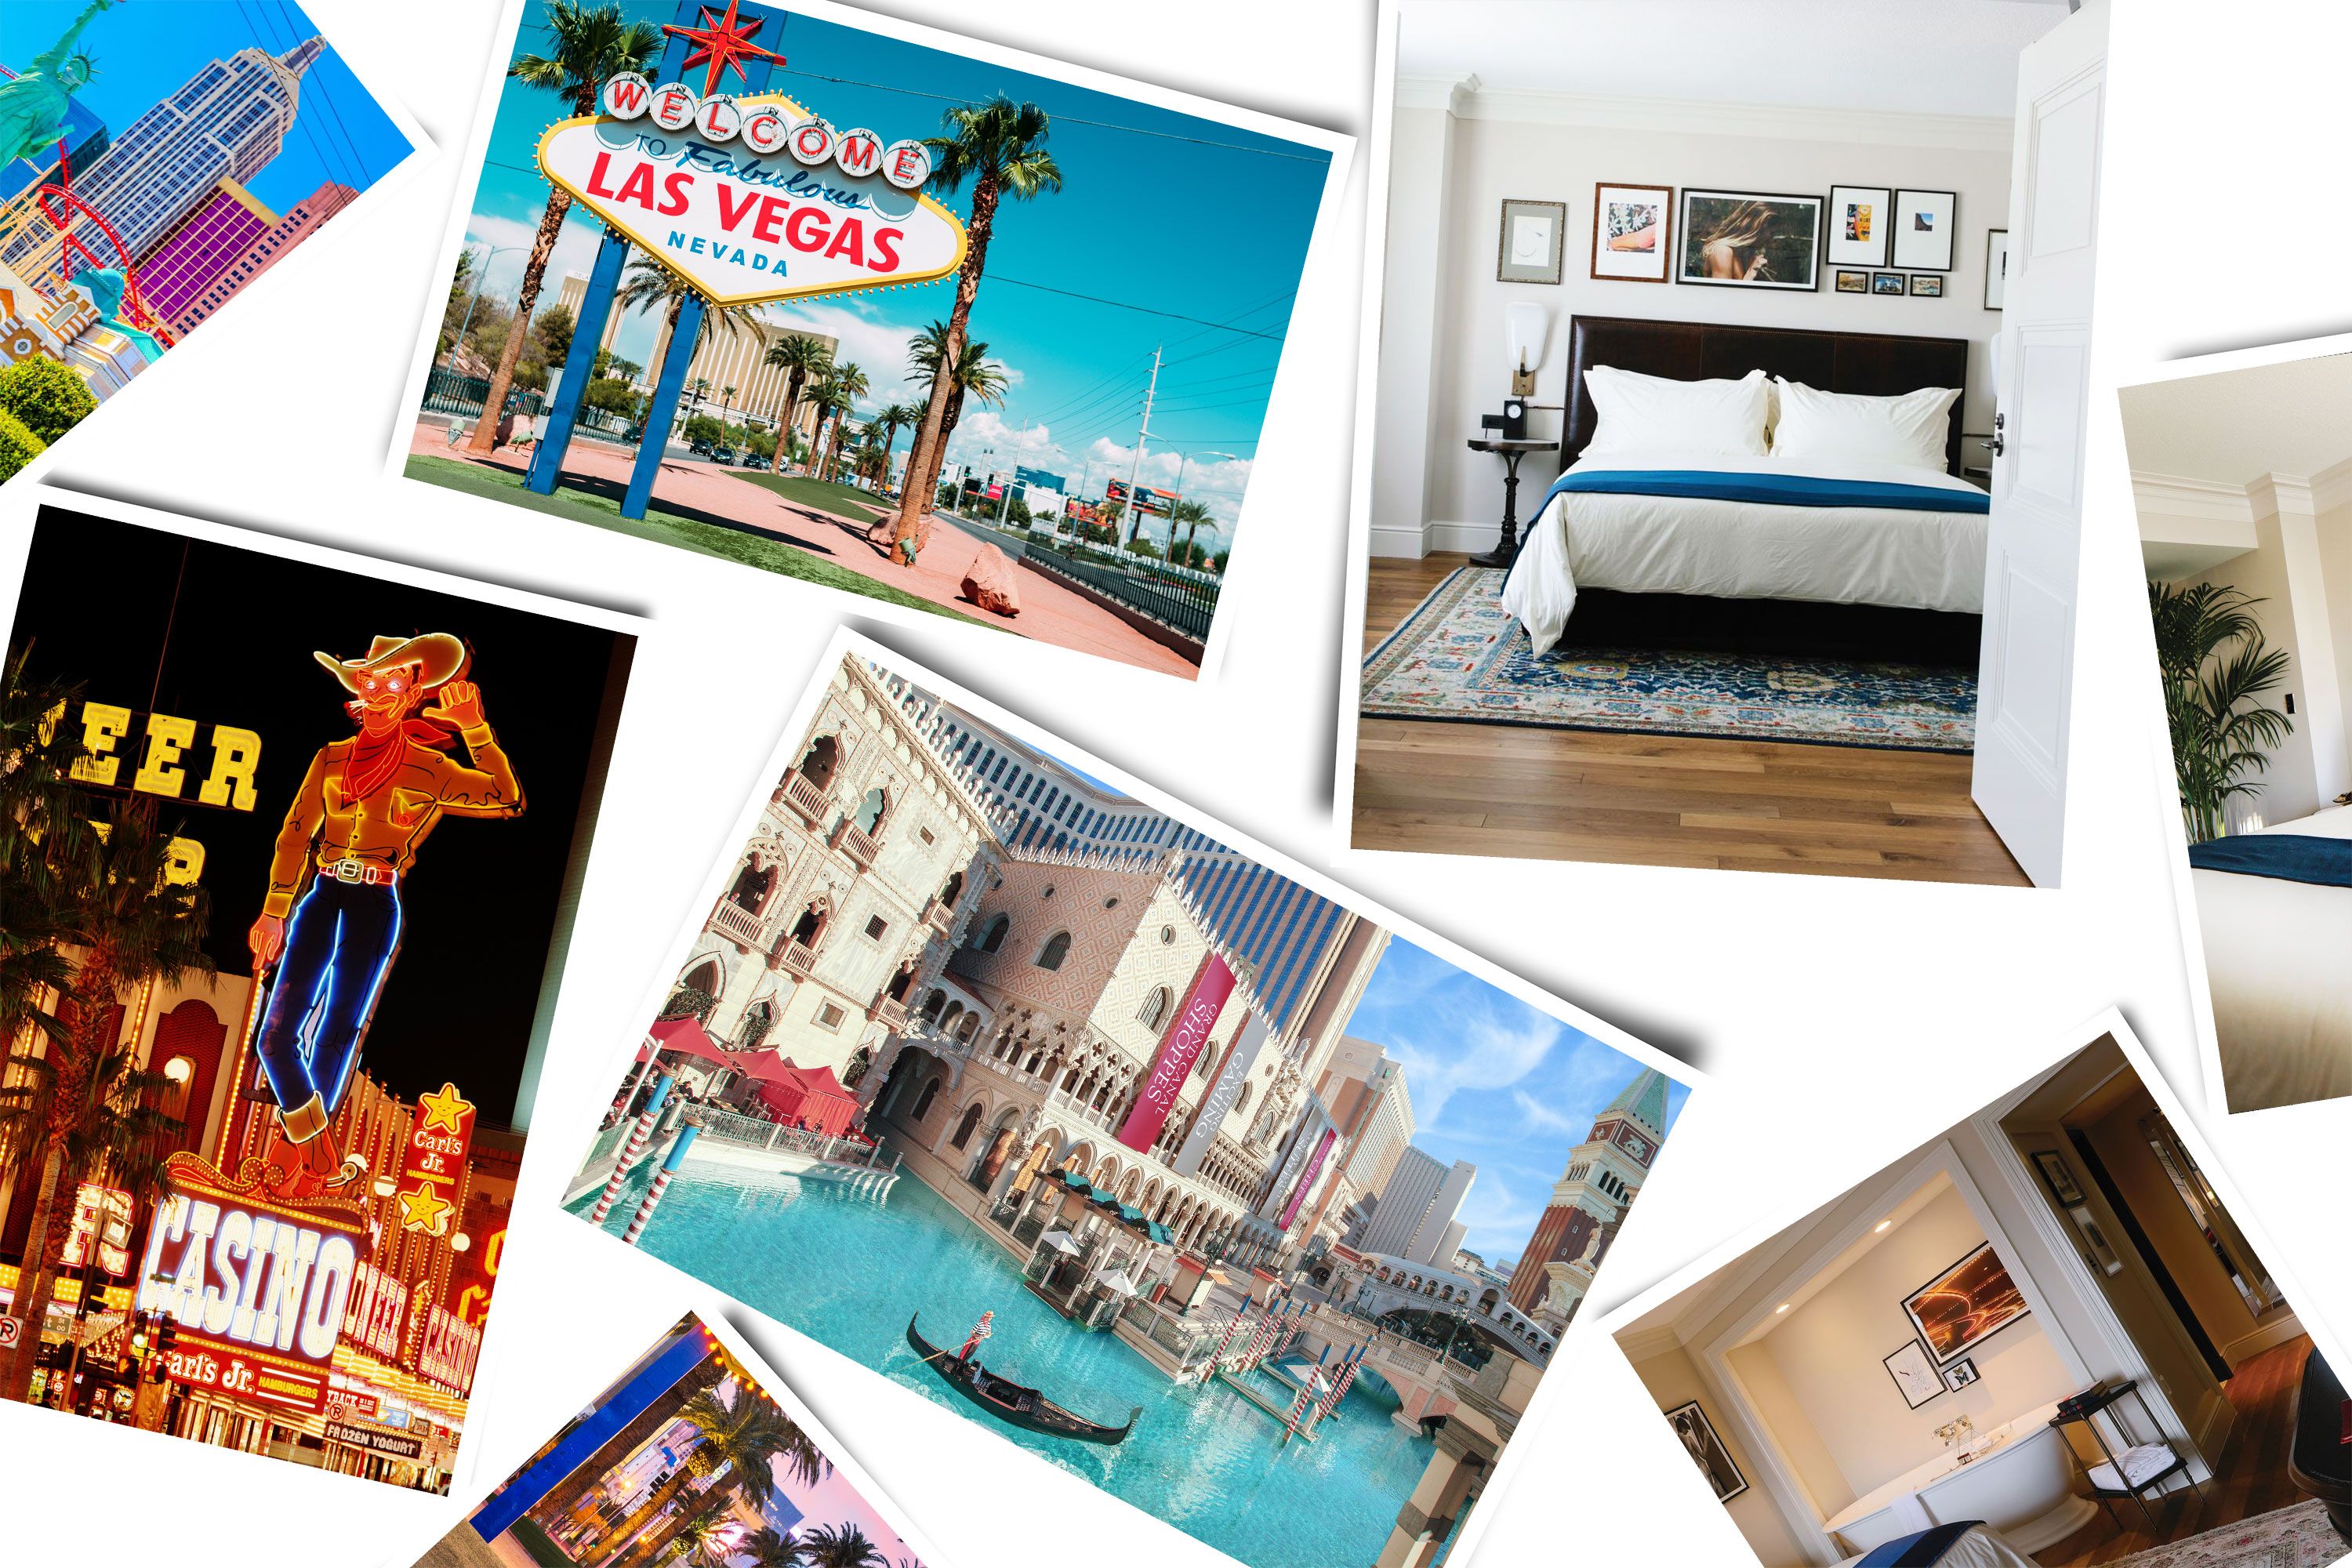 Hotels in Las Vegas: Staying at The Venetian - Nomadic Fare